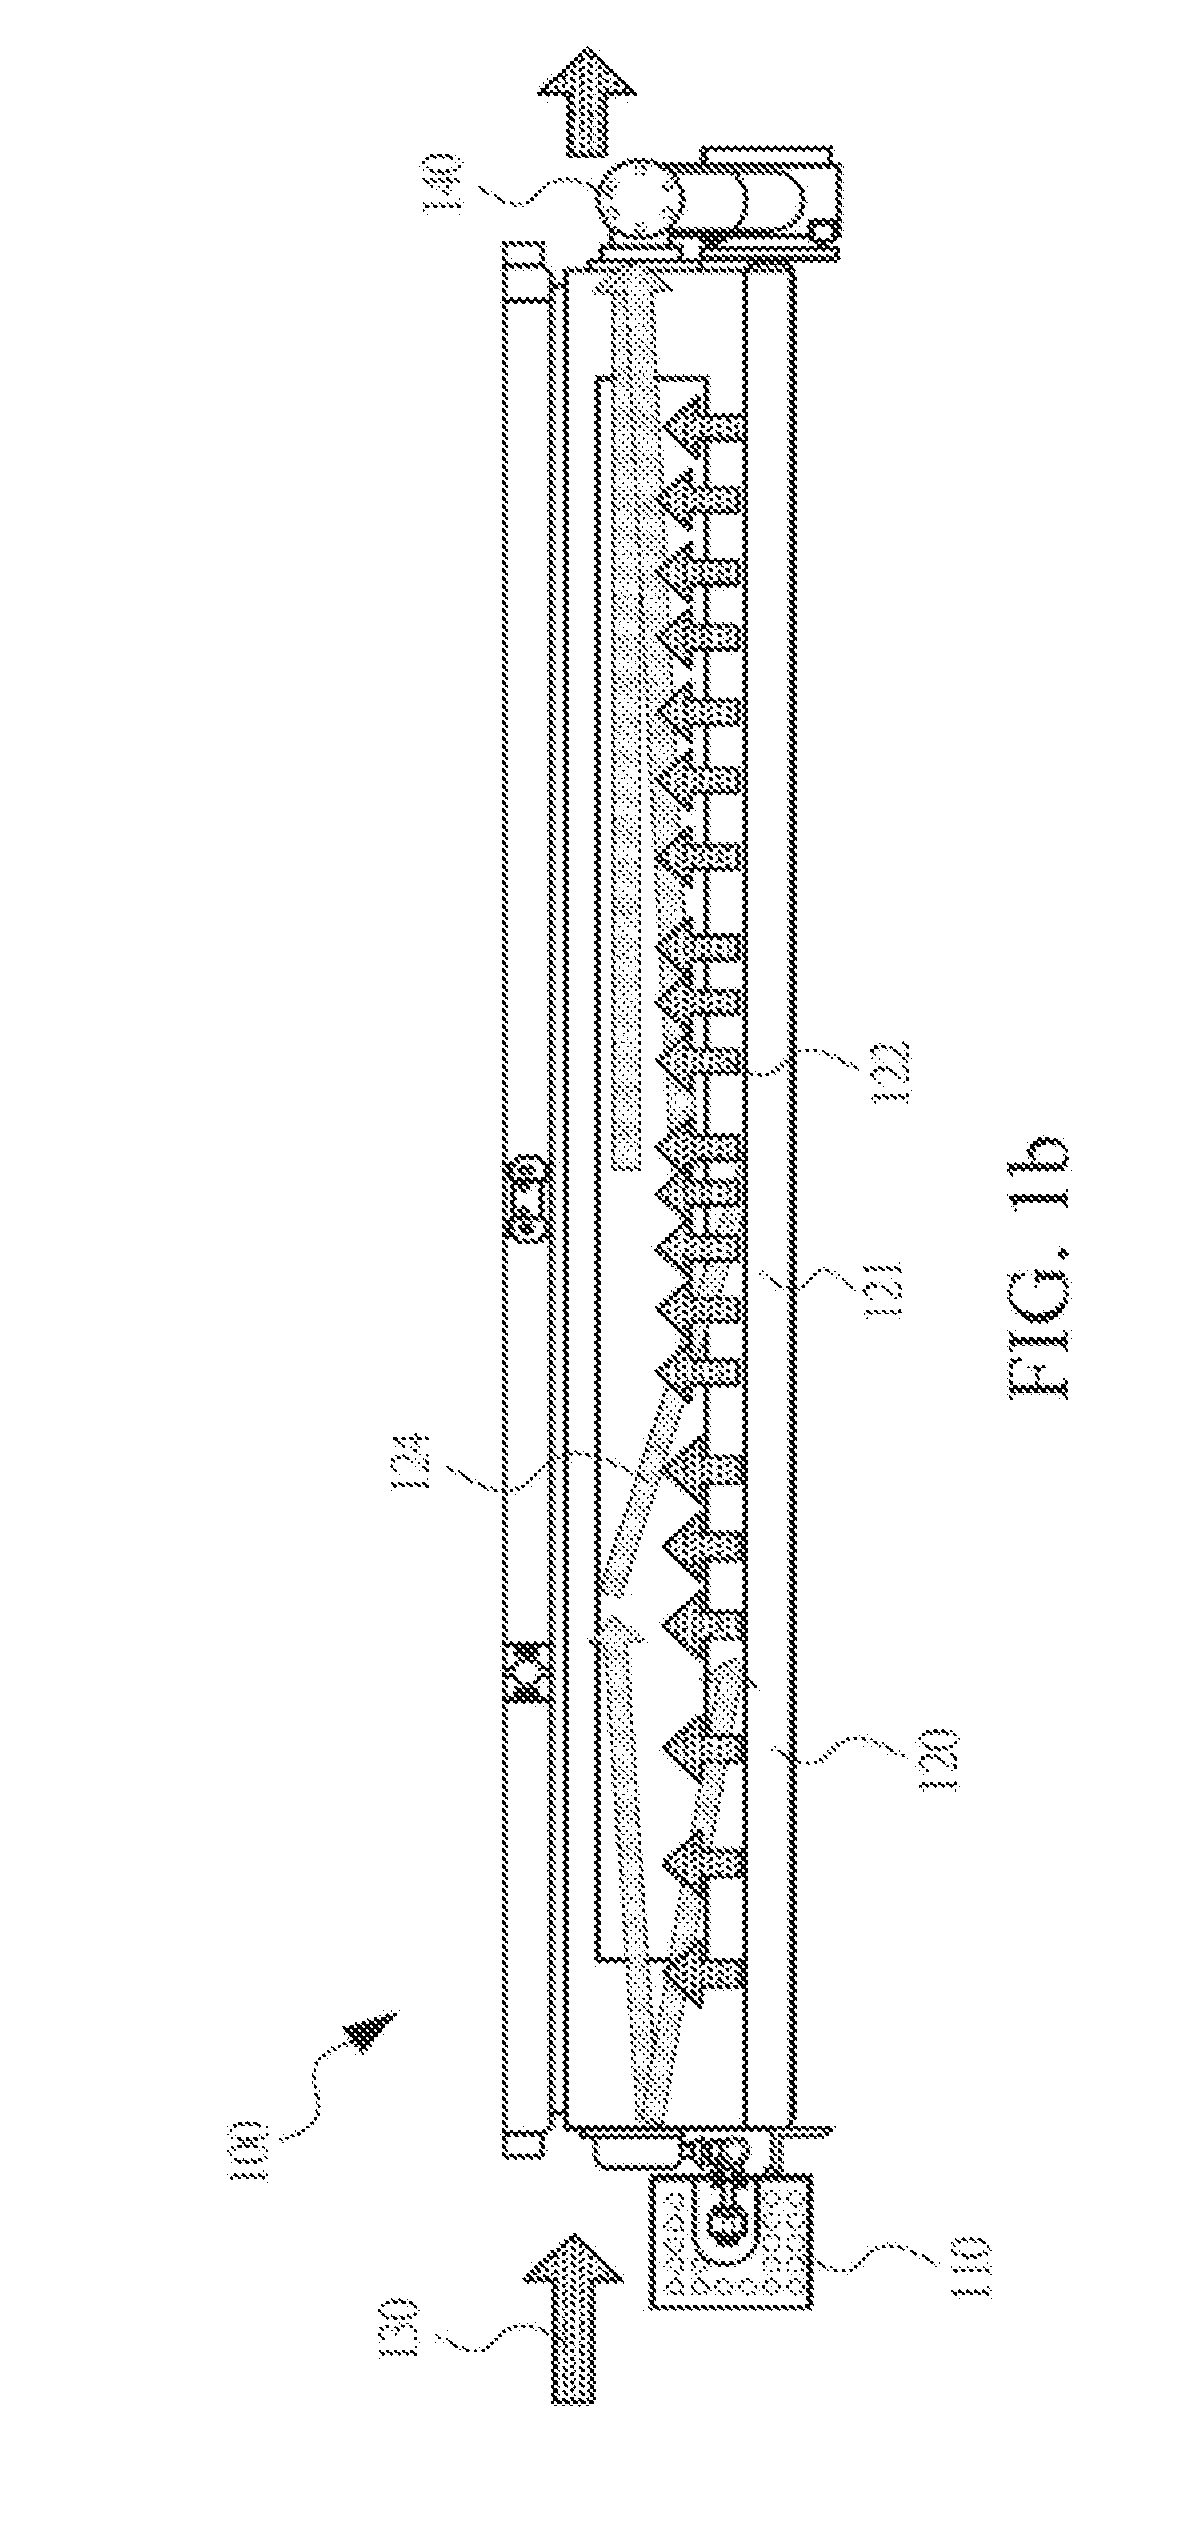 Substrate baking apparatus and baking operation mehod thereof